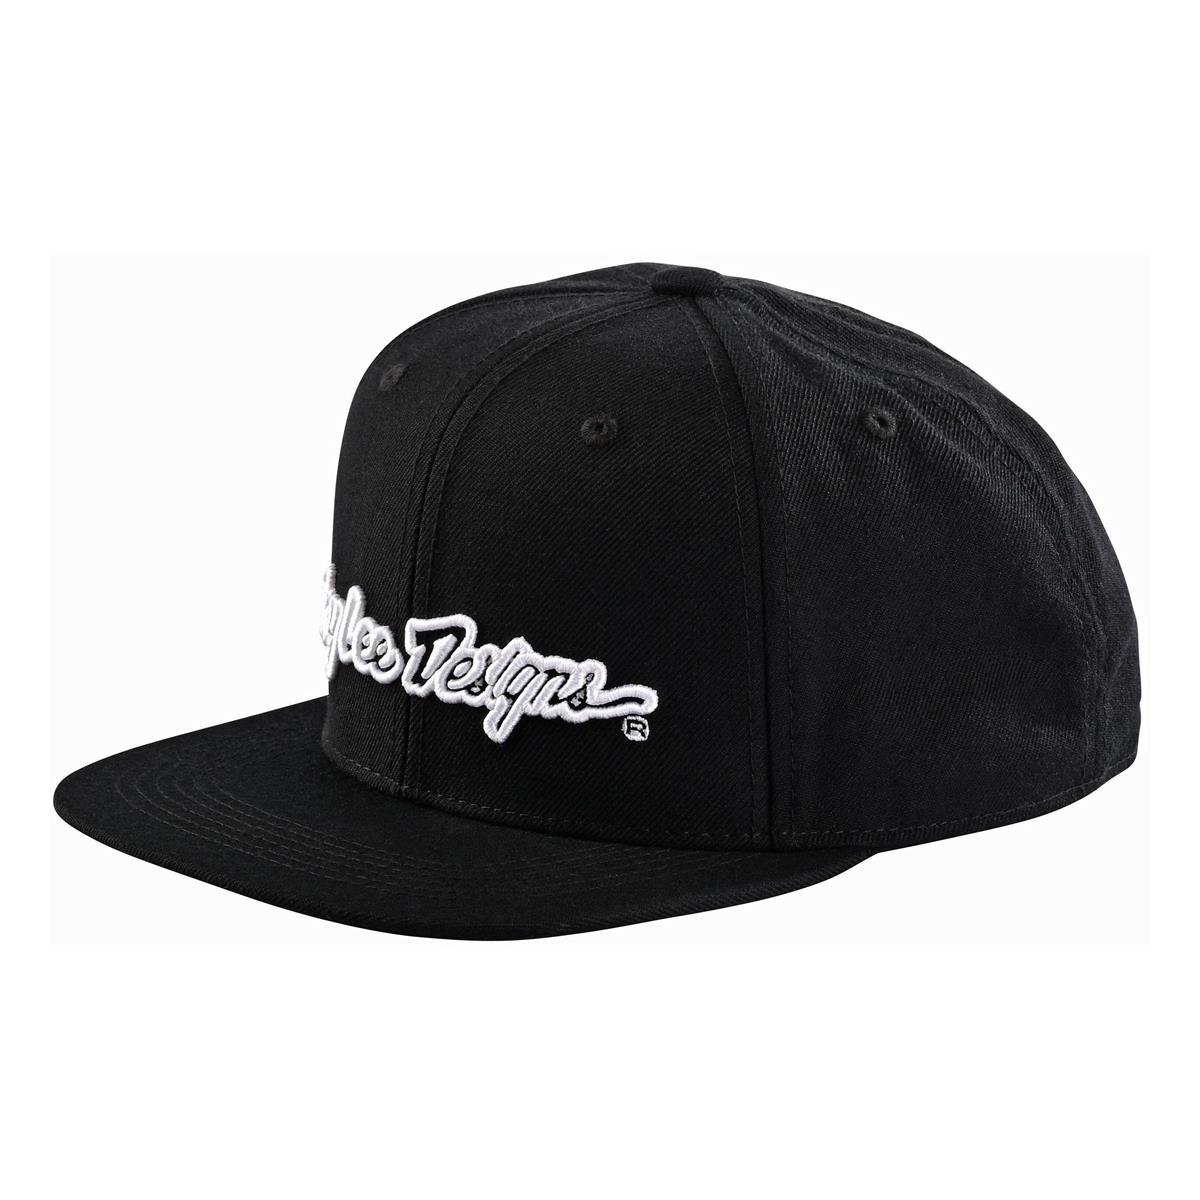 Troy Lee Designs 9Fifty Cappellino Snap Back Signature Nero/Bianco